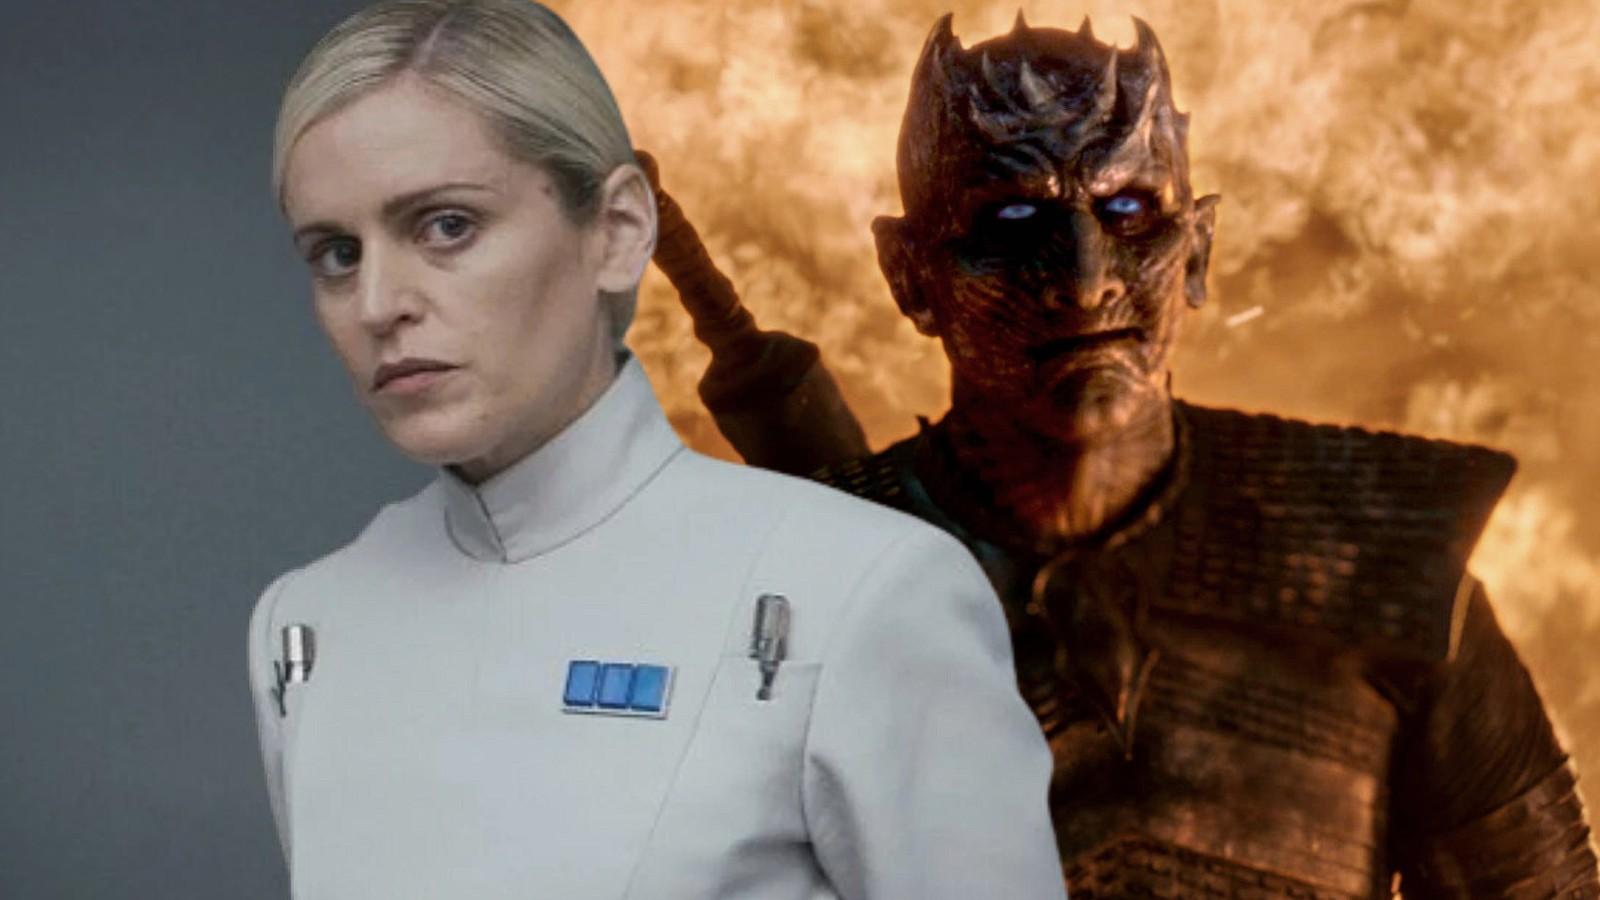 Denise Gough as Dedra Meero in Andor and a still of the Night King from Game of Thrones